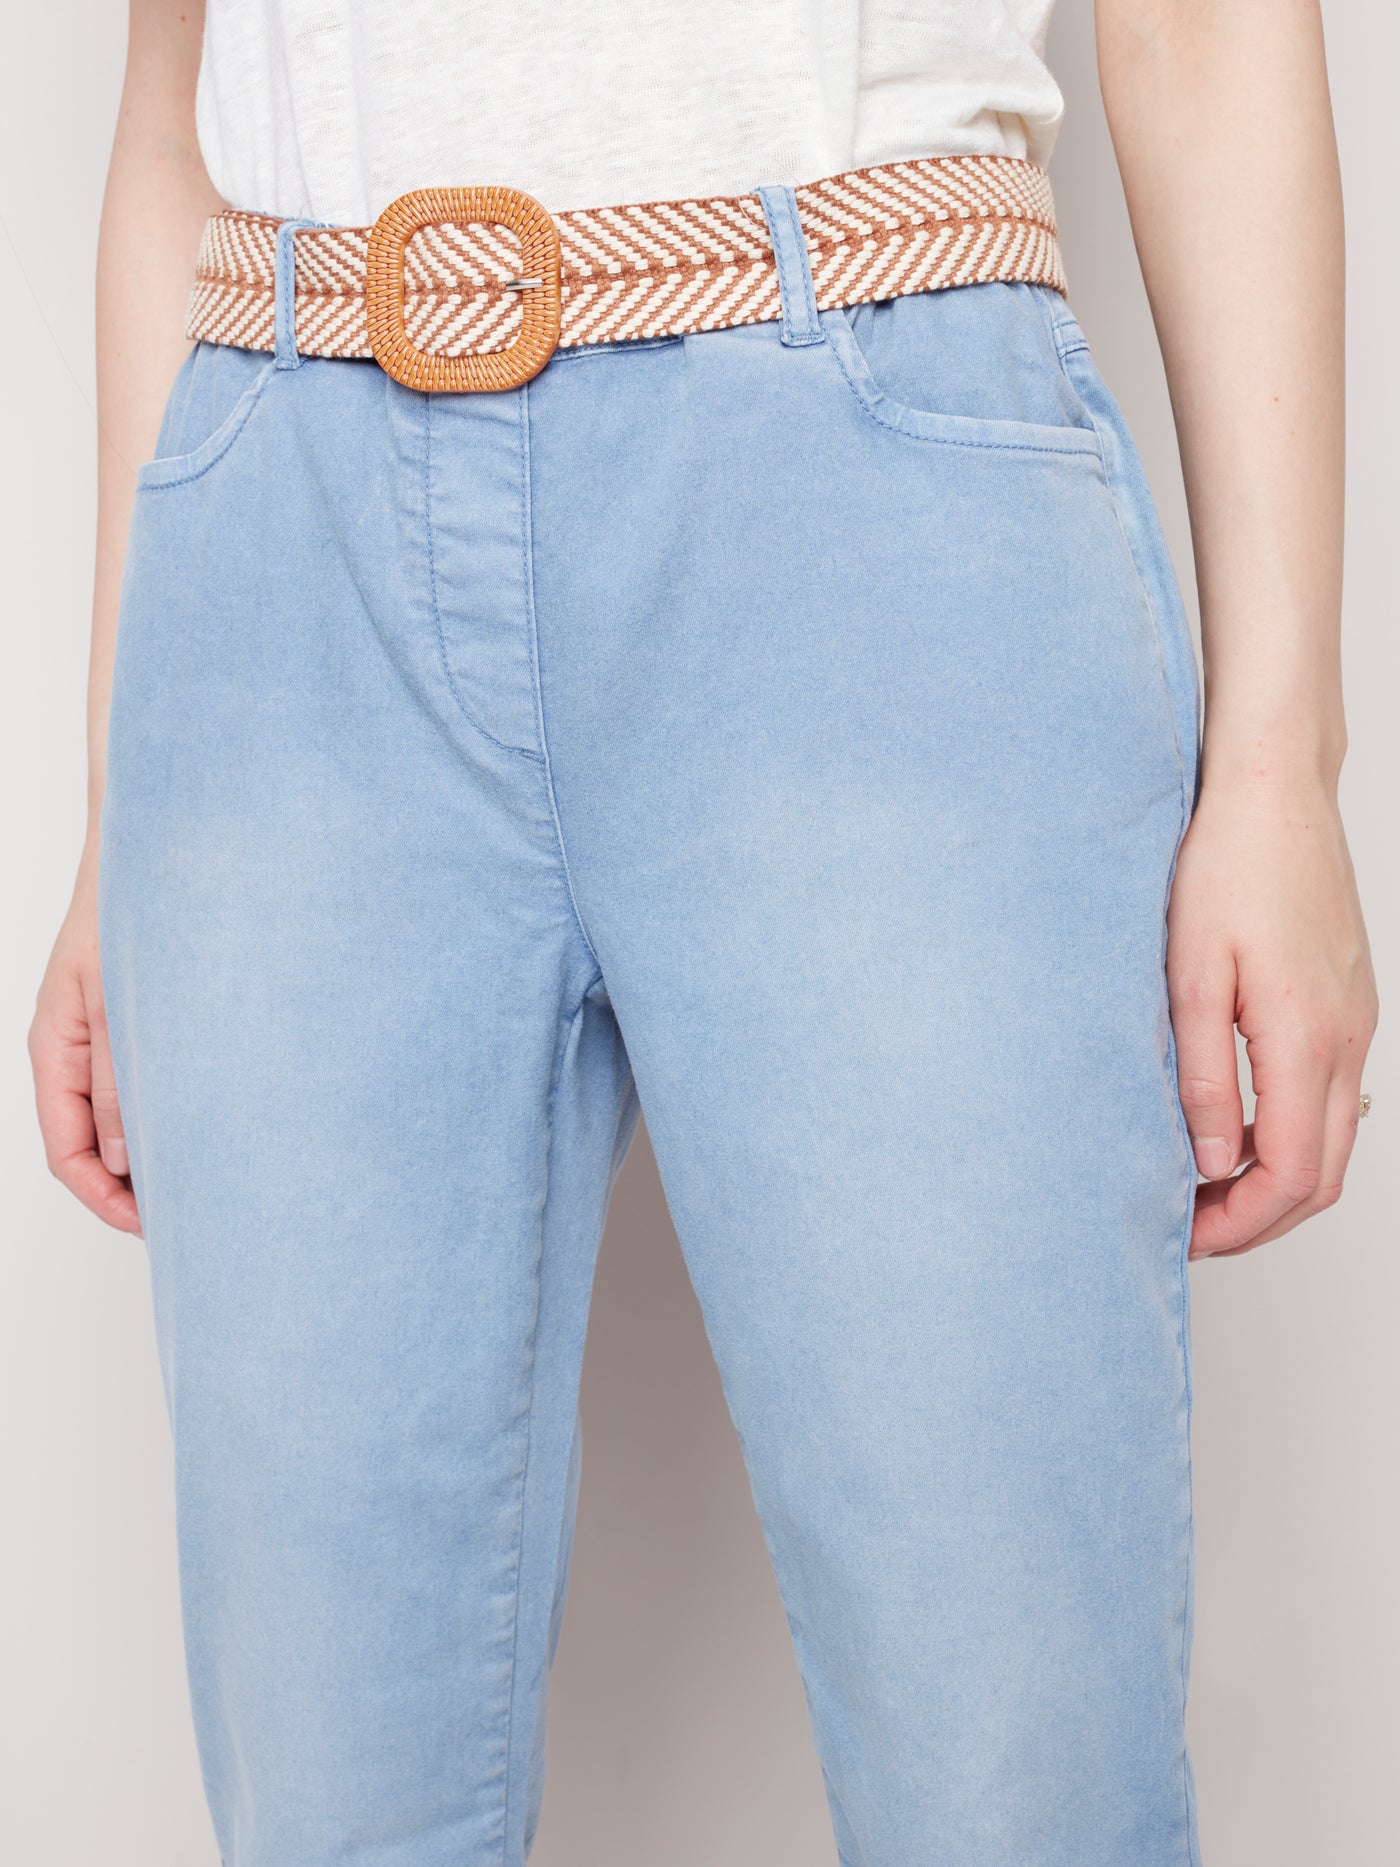 Charlie B Pant - Rolled Cuff - Blue Chambray